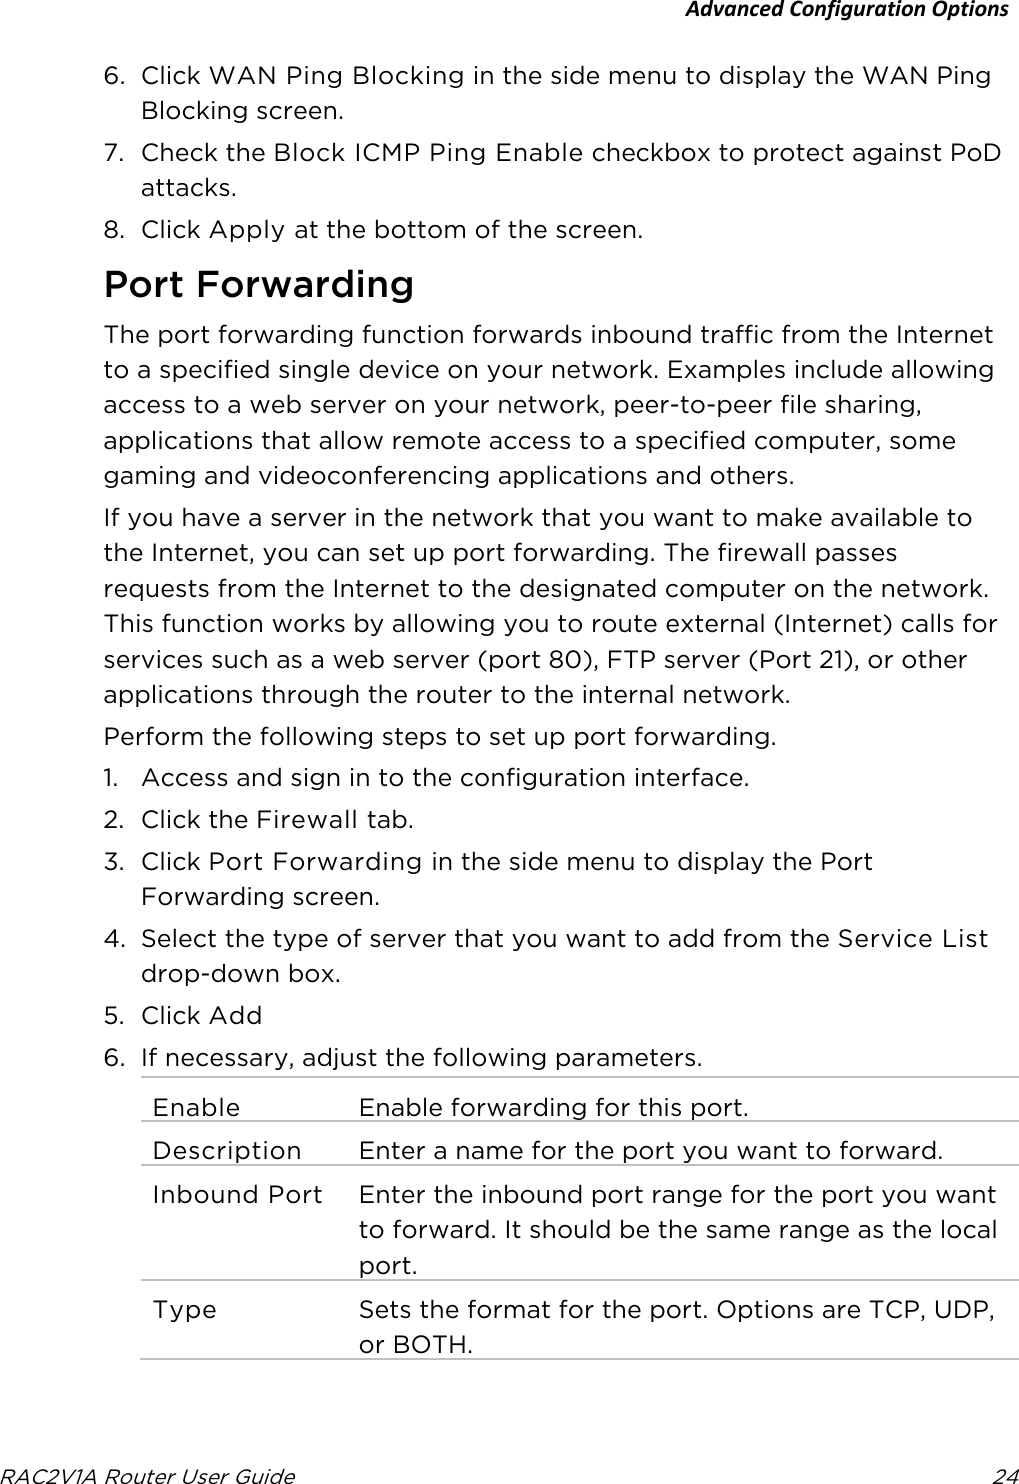 Advanced Configuration Options  RAC2V1A Router User Guide 24  6. Click WAN Ping Blocking in the side menu to display the WAN Ping Blocking screen. 7. Check the Block ICMP Ping Enable checkbox to protect against PoD attacks. 8. Click Apply at the bottom of the screen.   Port Forwarding The port forwarding function forwards inbound traffic from the Internet to a specified single device on your network. Examples include allowing access to a web server on your network, peer-to-peer file sharing, applications that allow remote access to a specified computer, some gaming and videoconferencing applications and others. If you have a server in the network that you want to make available to the Internet, you can set up port forwarding. The firewall passes requests from the Internet to the designated computer on the network. This function works by allowing you to route external (Internet) calls for services such as a web server (port 80), FTP server (Port 21), or other applications through the router to the internal network. Perform the following steps to set up port forwarding. 1. Access and sign in to the configuration interface. 2. Click the Firewall tab. 3. Click Port Forwarding in the side menu to display the Port Forwarding screen. 4. Select the type of server that you want to add from the Service List drop-down box. 5. Click Add 6. If necessary, adjust the following parameters. Enable Enable forwarding for this port. Description Enter a name for the port you want to forward. Inbound Port Enter the inbound port range for the port you want to forward. It should be the same range as the local port. Type Sets the format for the port. Options are TCP, UDP, or BOTH. 